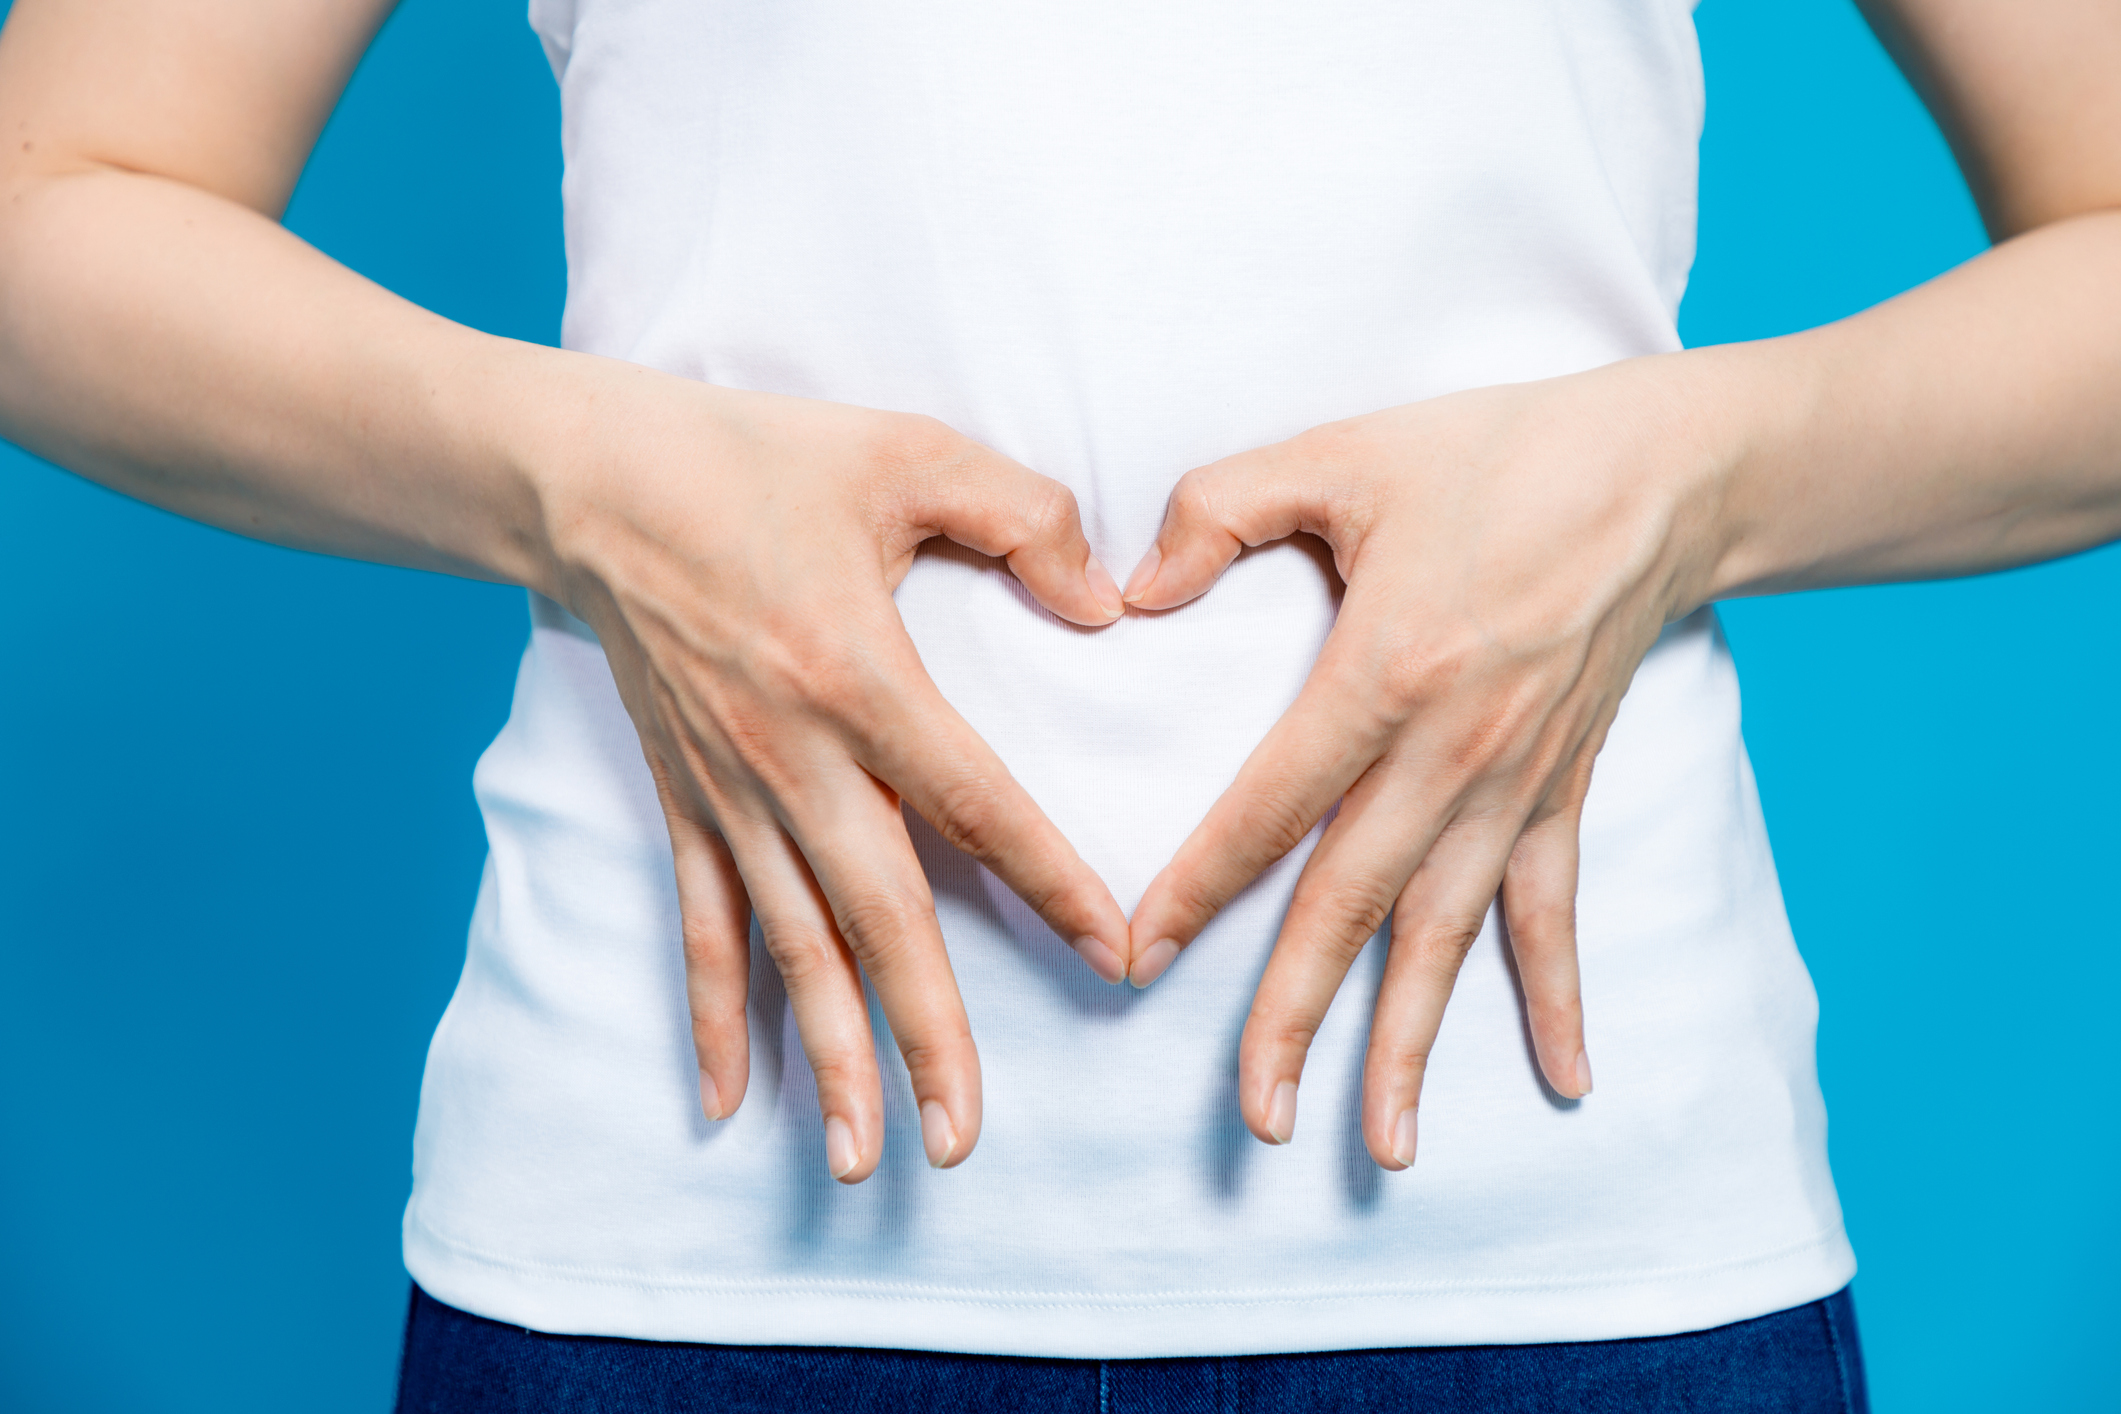 woman making heart shape with hands over stomach